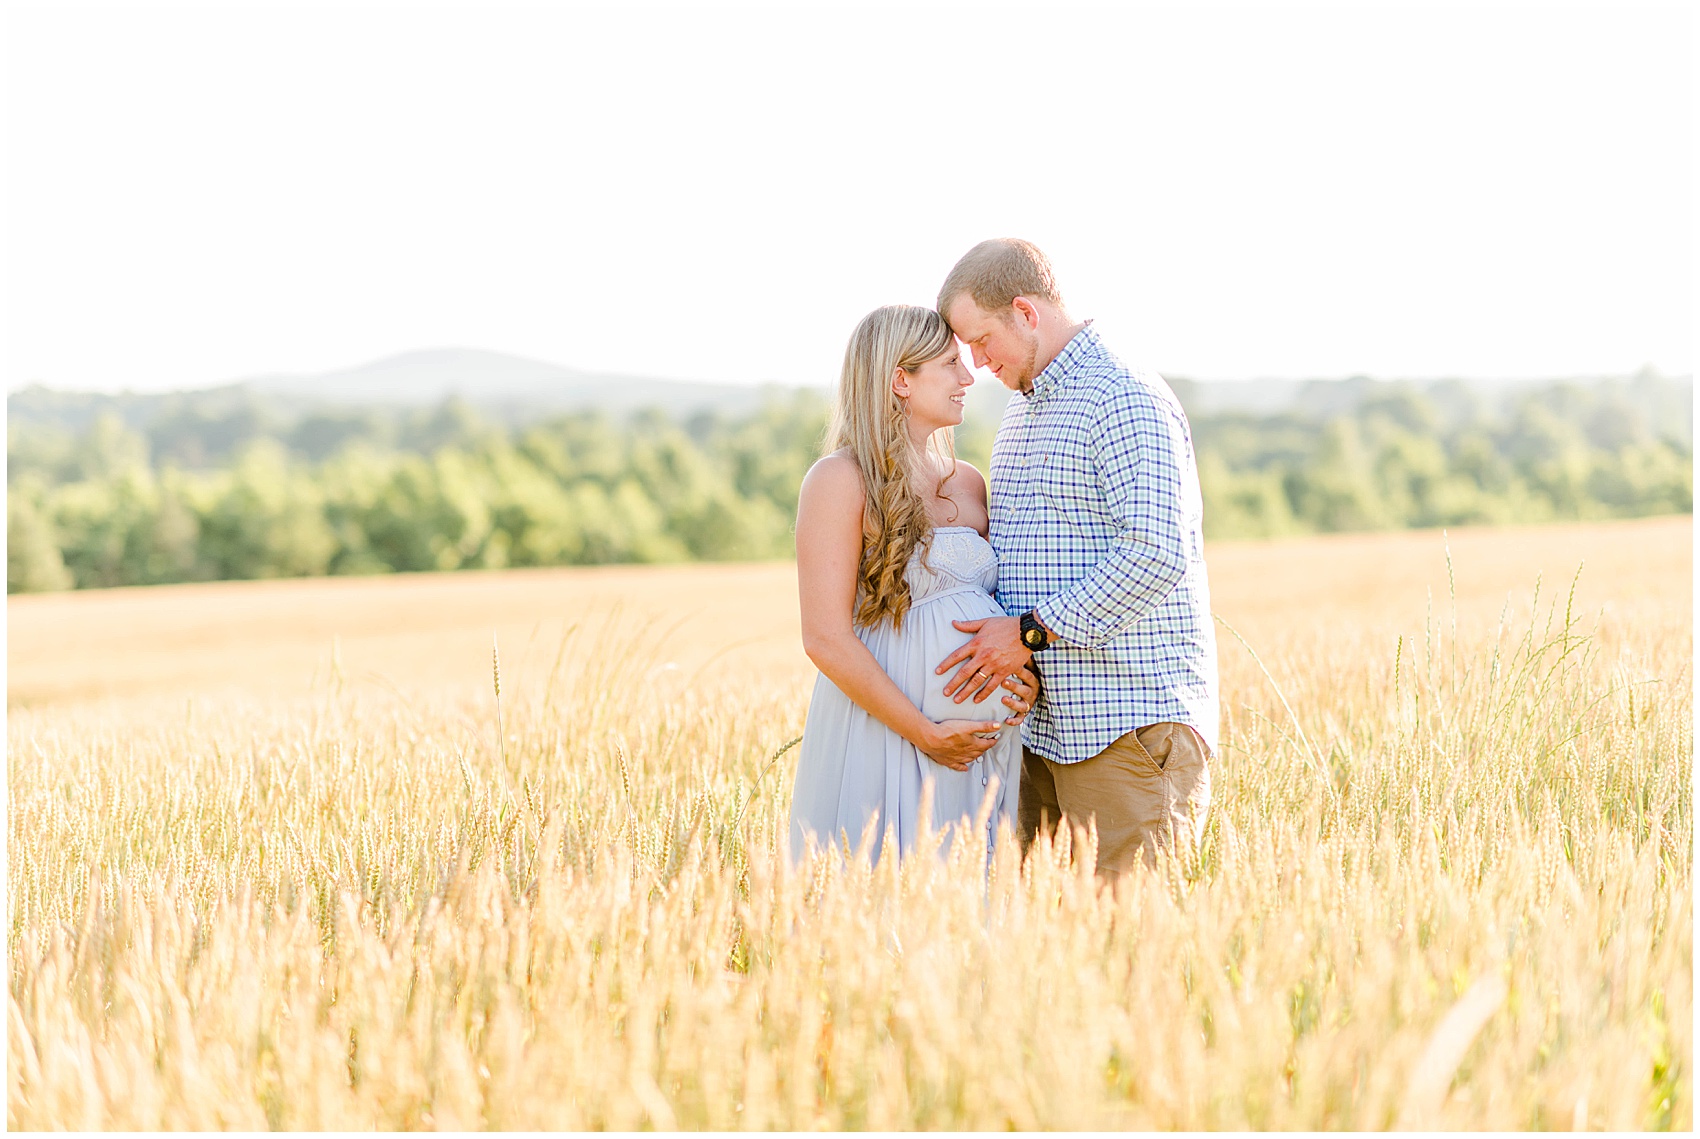 Harvest House and Catering Ramseur NC wheat field maternity session Charleston SC wedding Photographer_0242.jpg